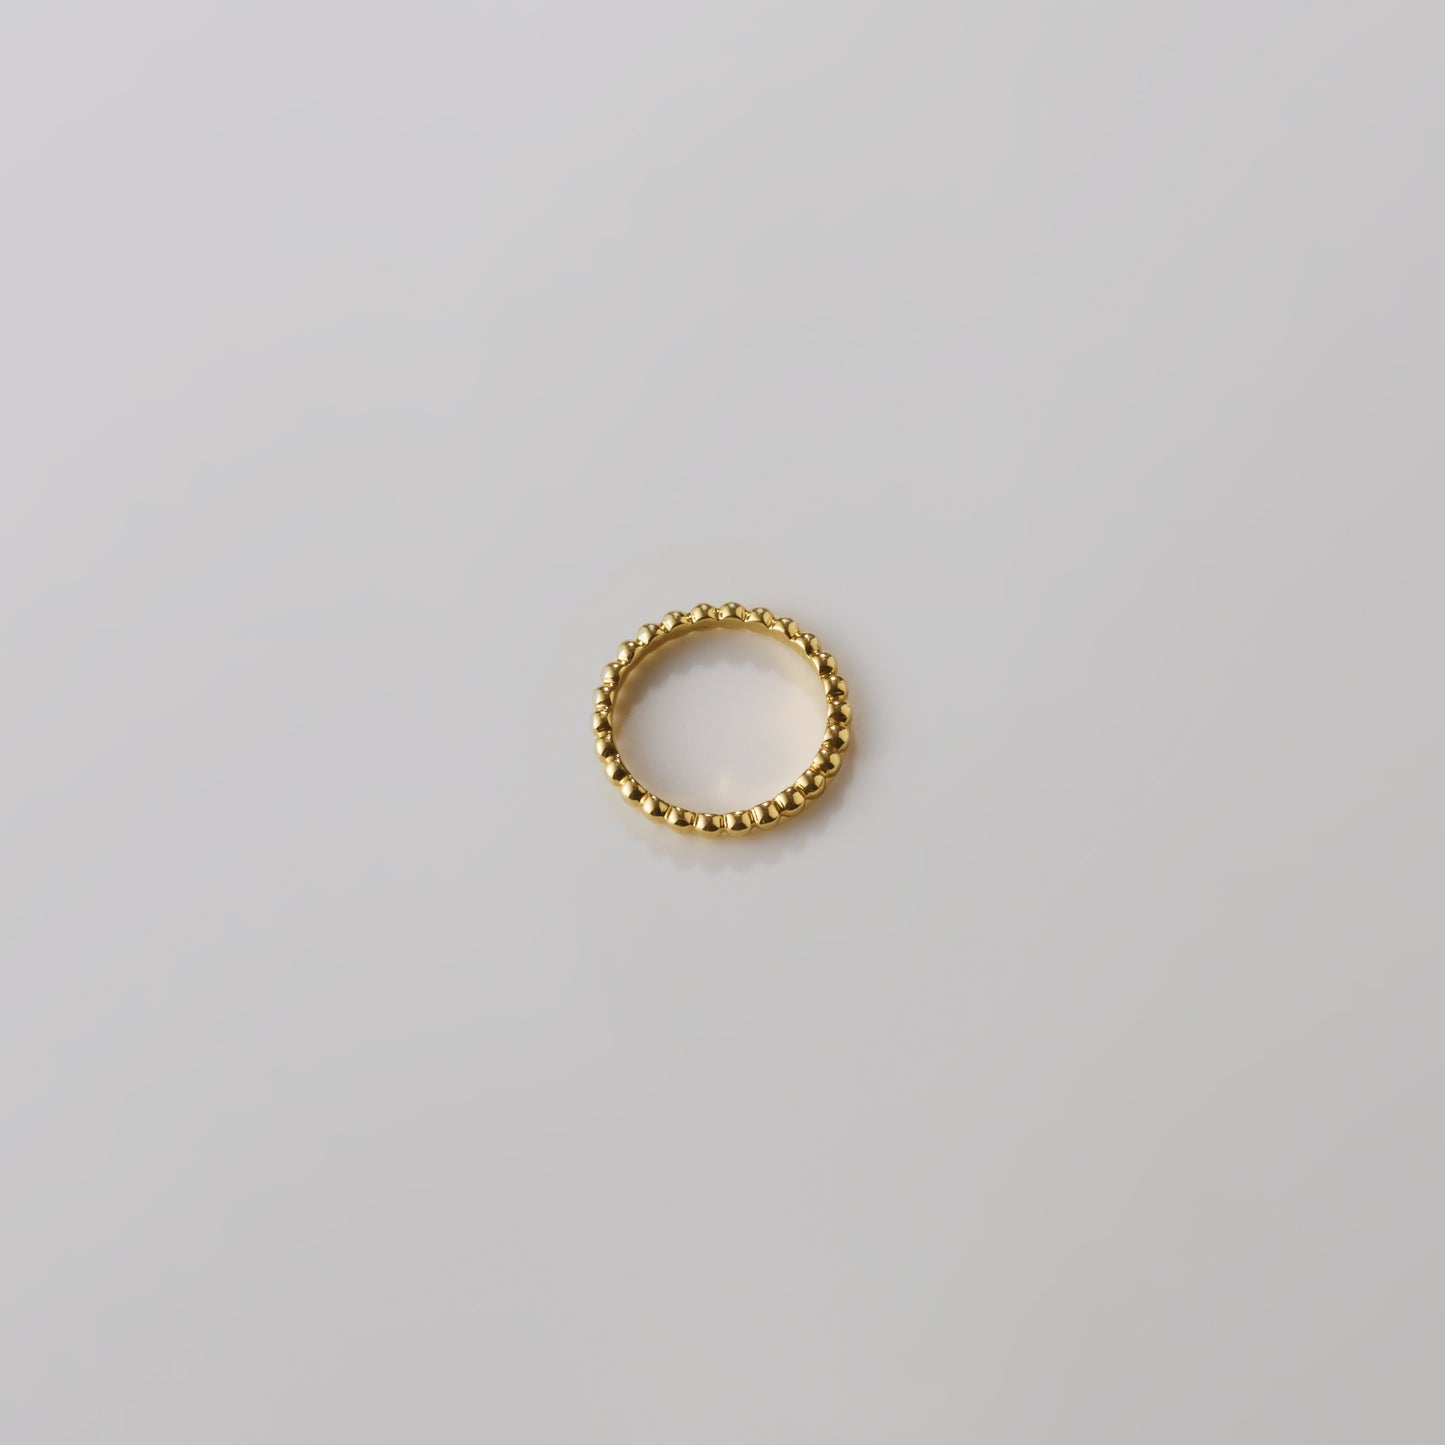 loquaxマタニティジュエリーセット ゴールド（Babyring Gold × Necklace Gold）